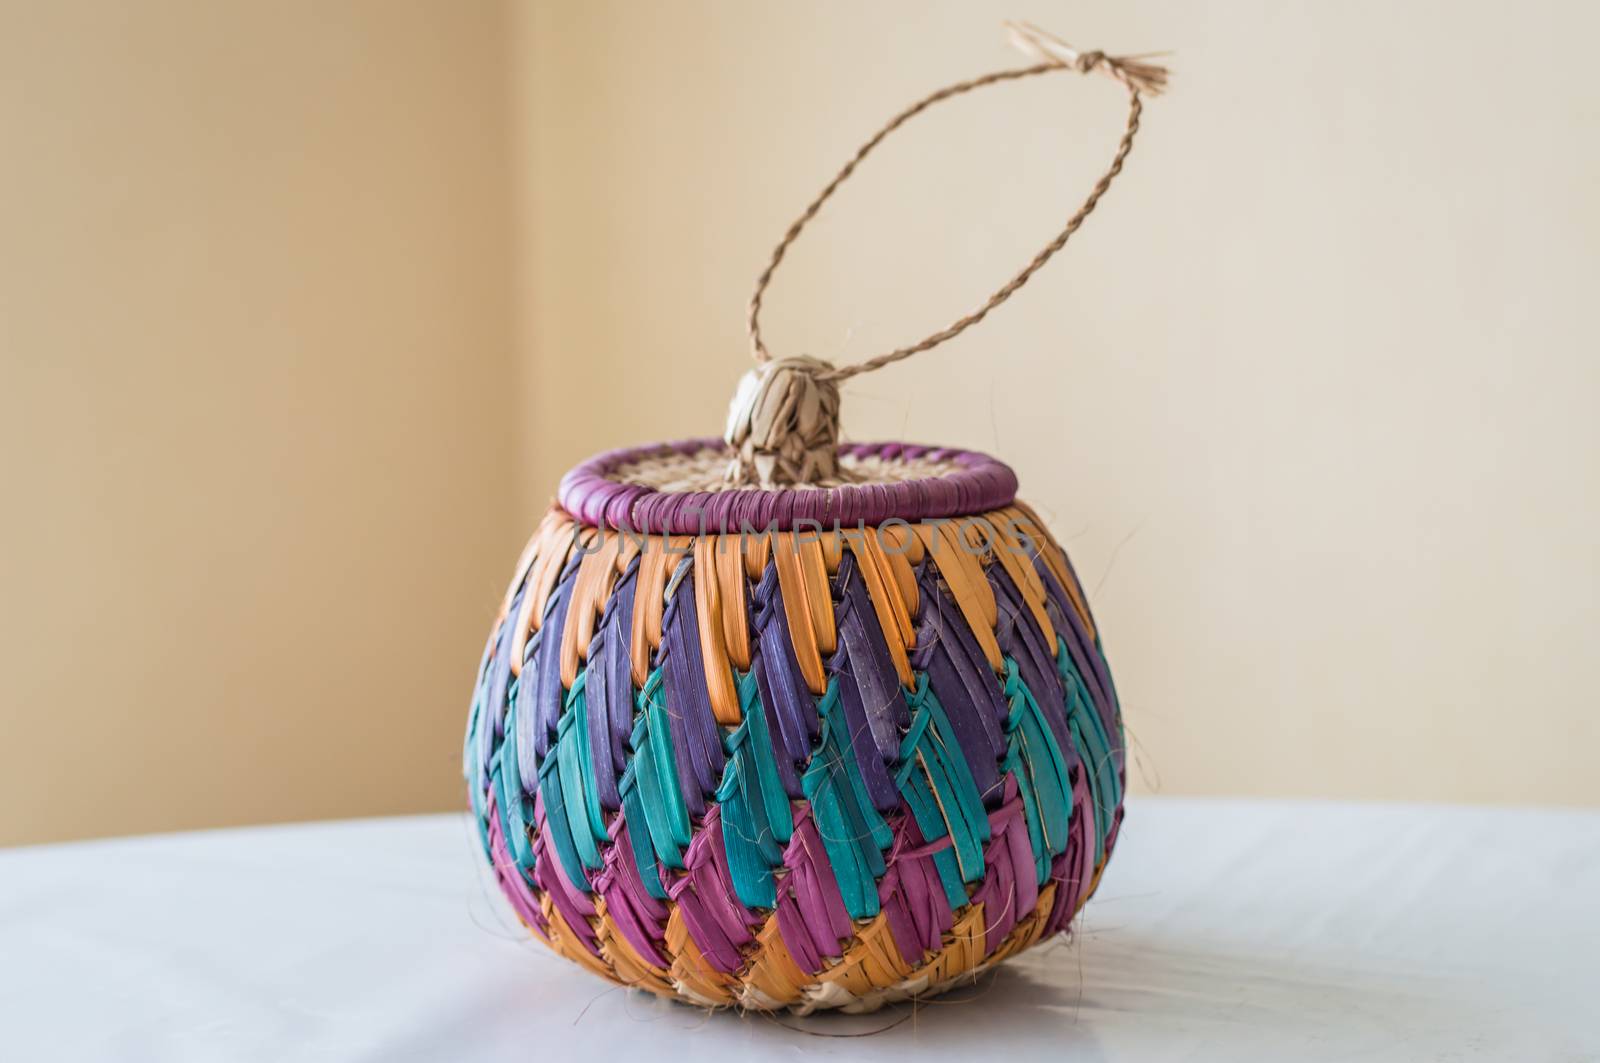 color braided bamboo basket on the table